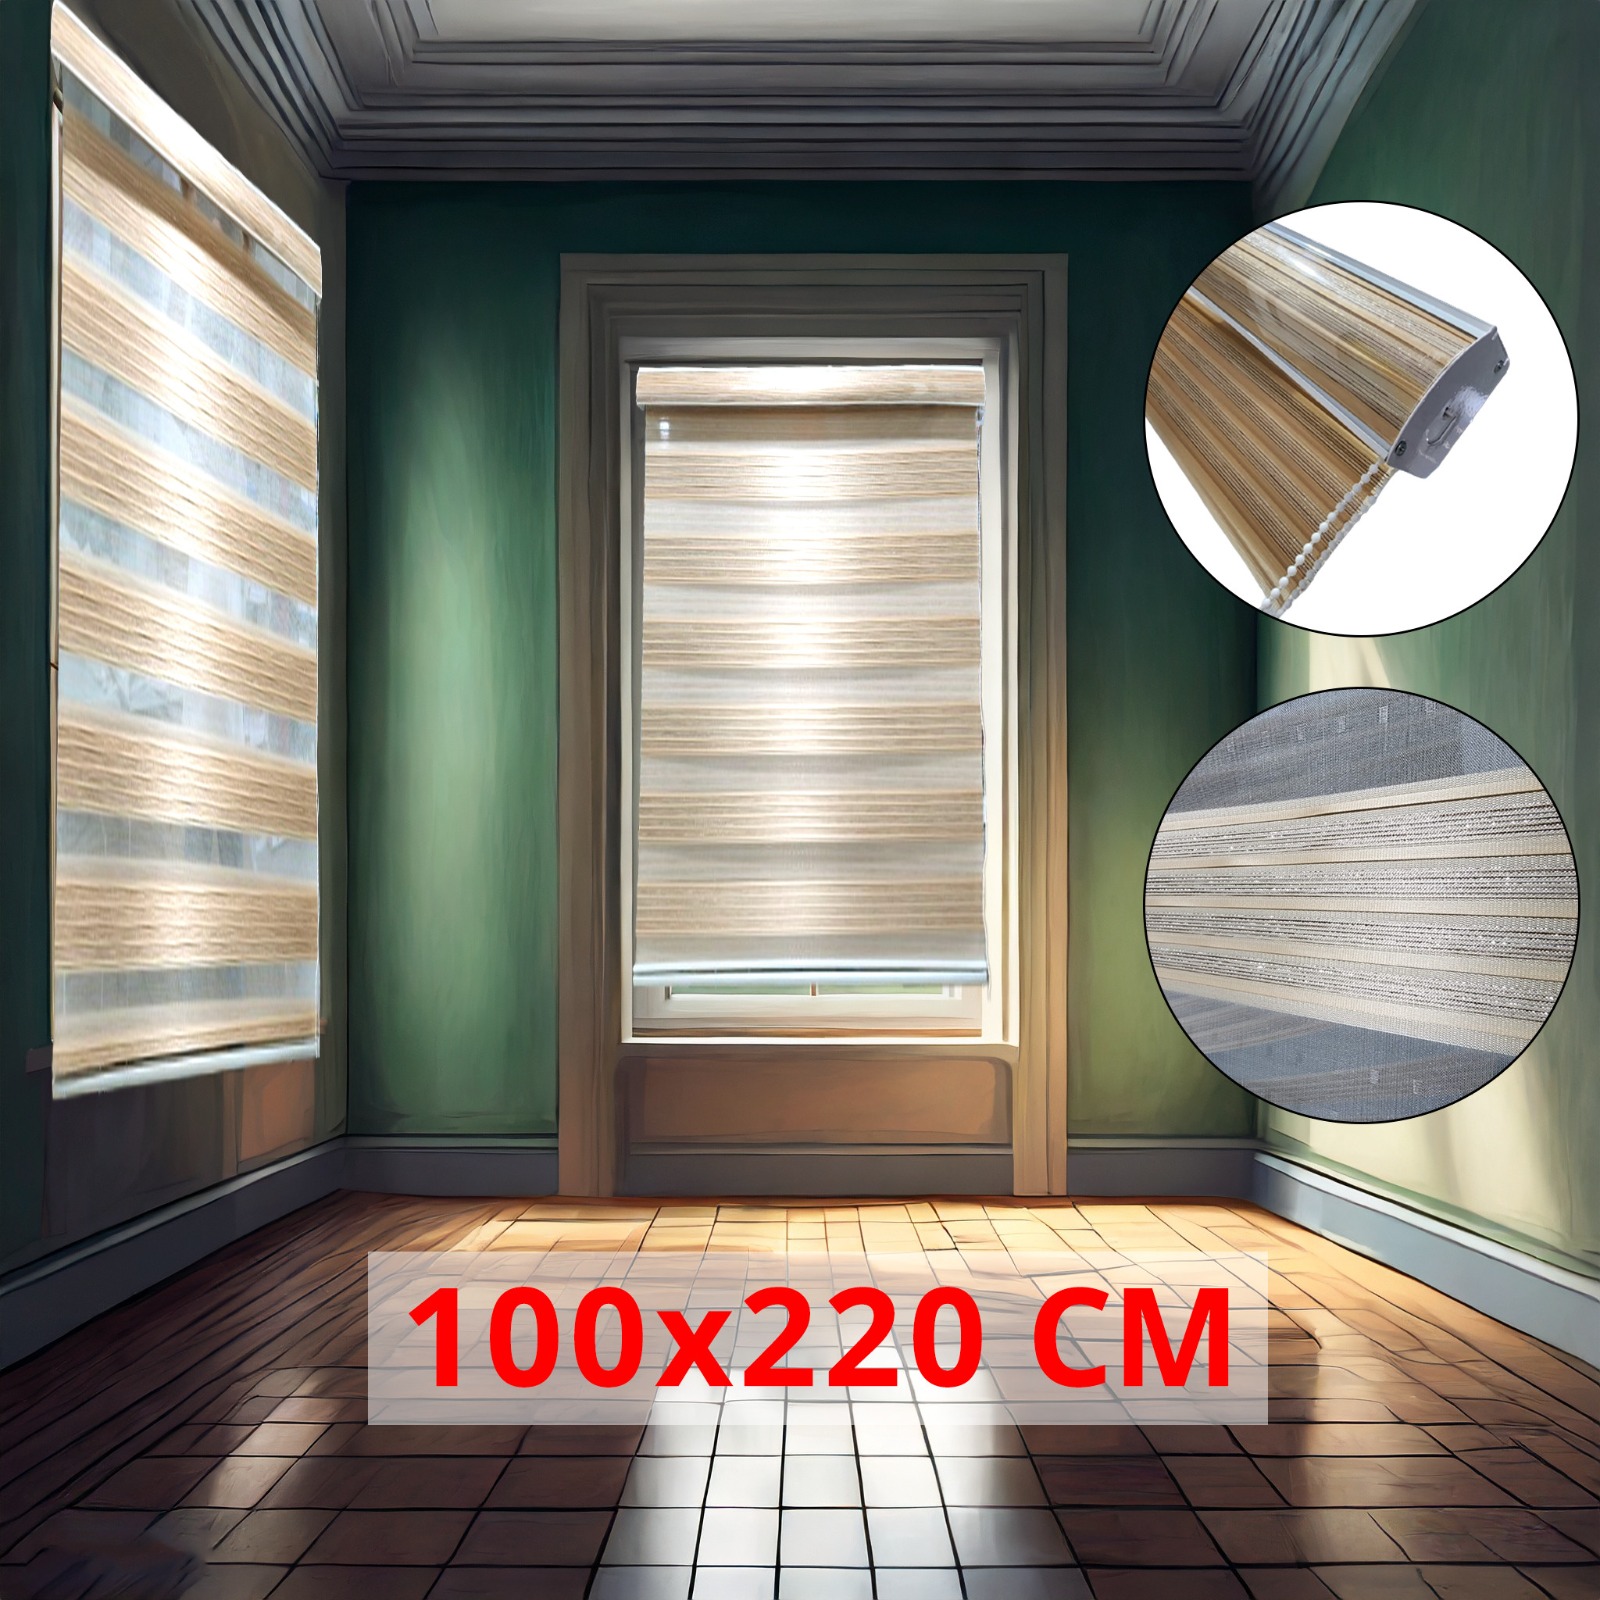 %28100%2A220cm+Glossy+Beige+%29+Modern+3D+Style+Window+and+Door+Roller+Blind